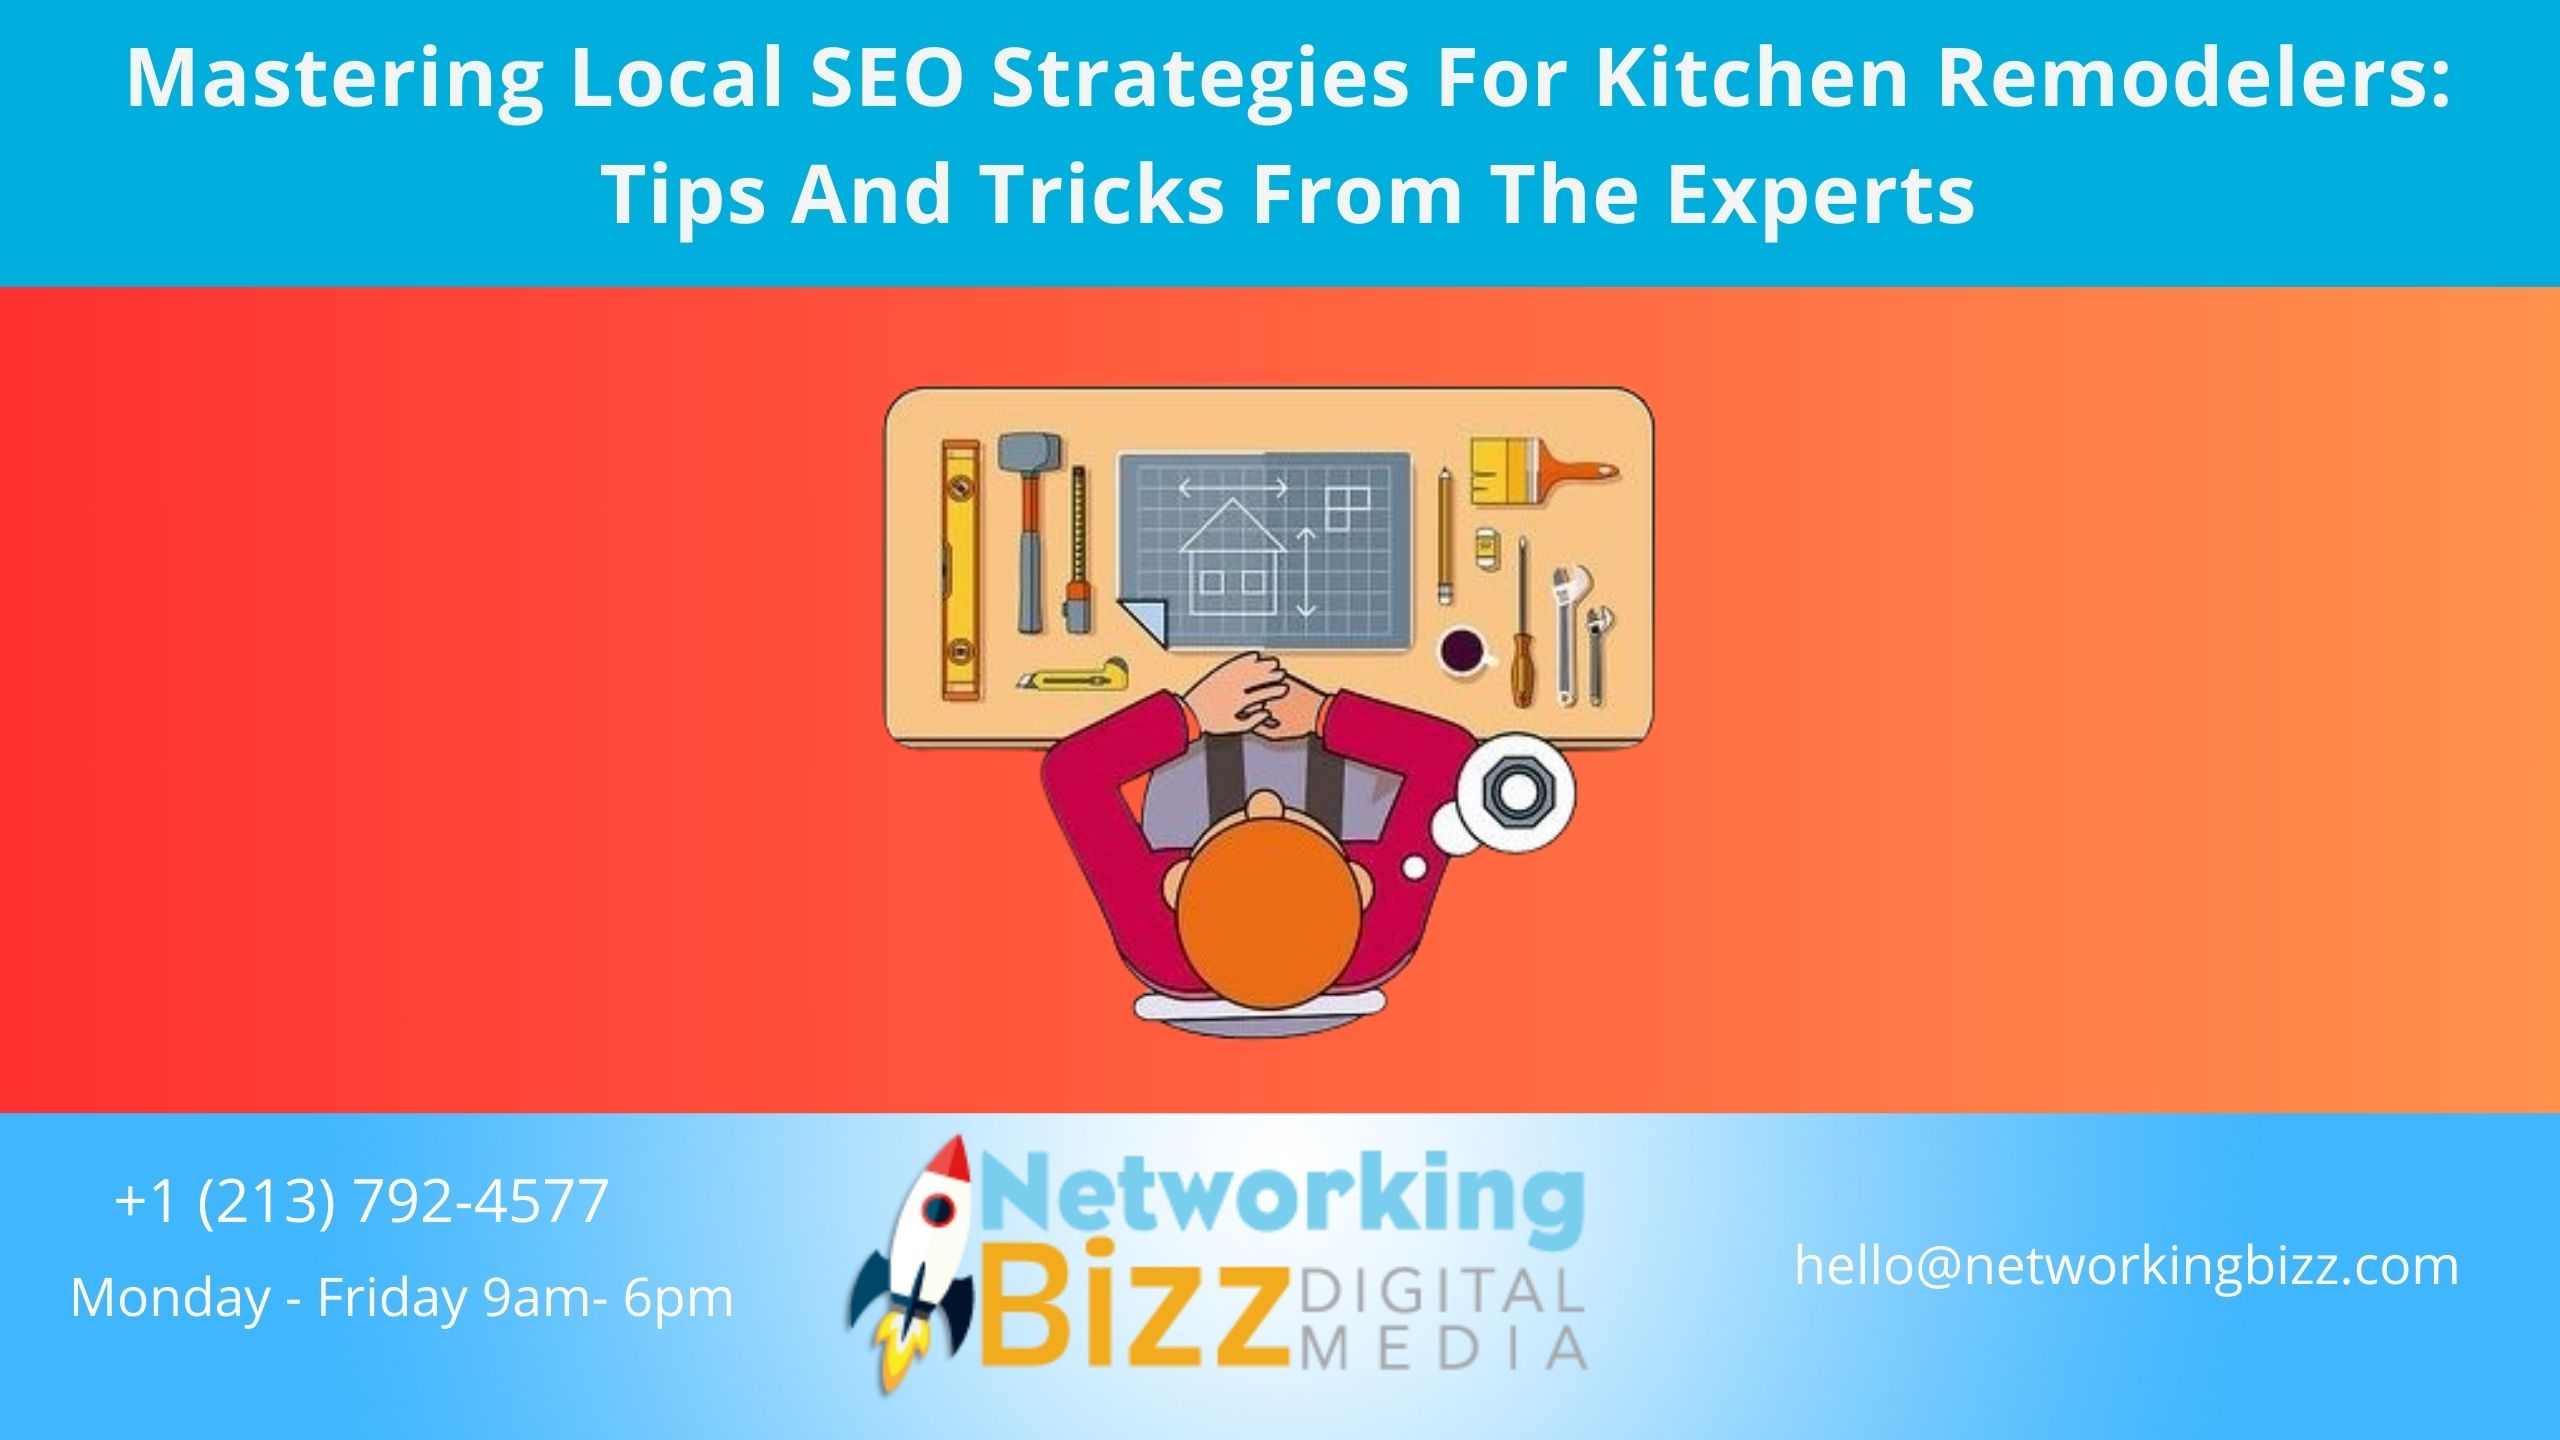 Mastering Local SEO Strategies For Kitchen Remodelers: Tips And Tricks From The Experts